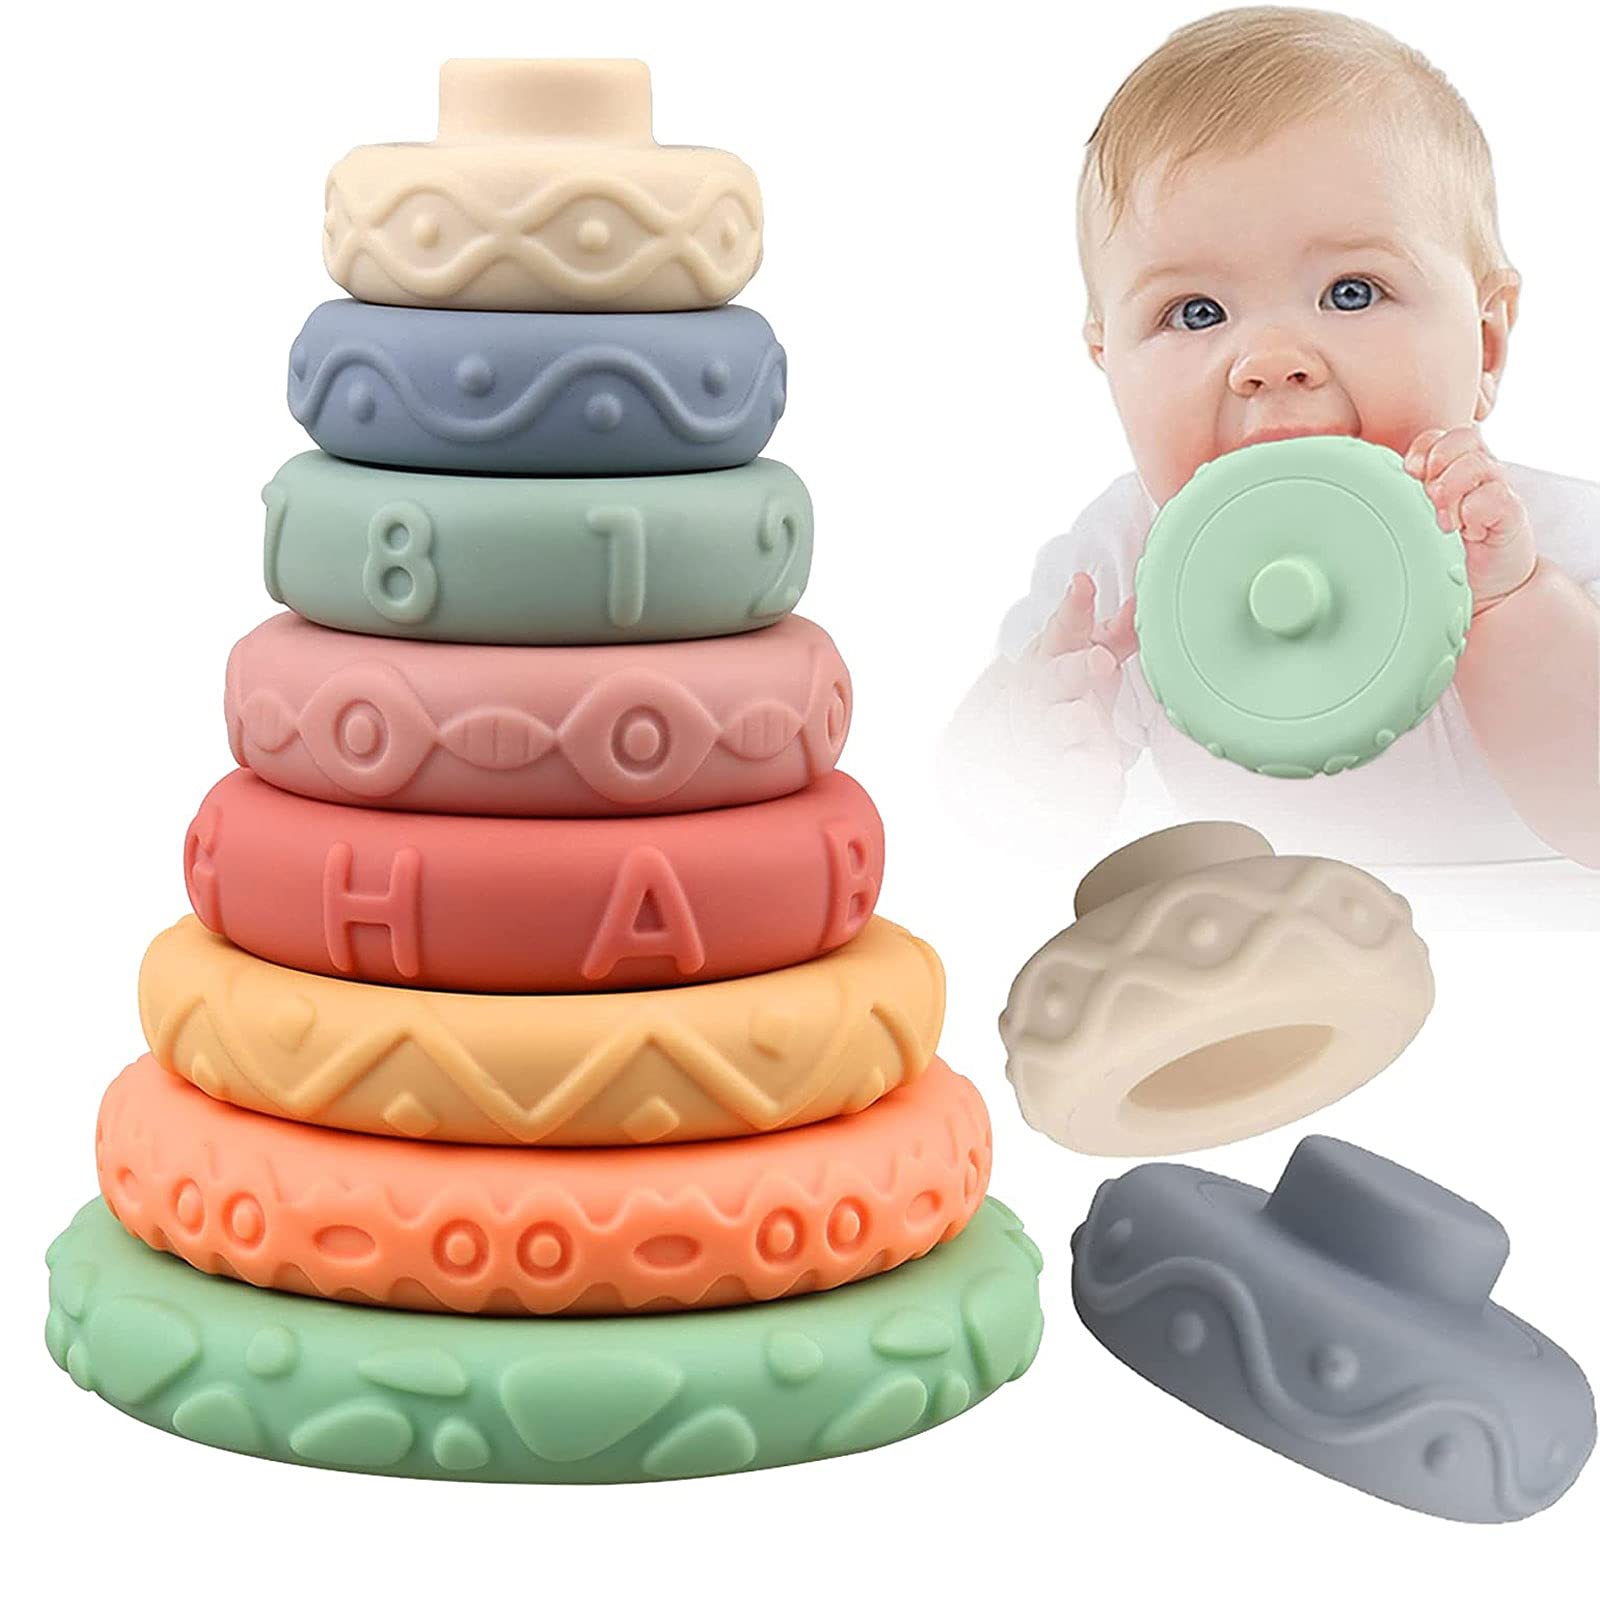 8 Pcs Stacking Rings Soft Toys for Babies 6 12 18 Months 1 Year Old Girls Boys - Toddlers Sensory Educational Montessori Baby Blocks - Infant Newborn Developmental Teething Learning Stacker